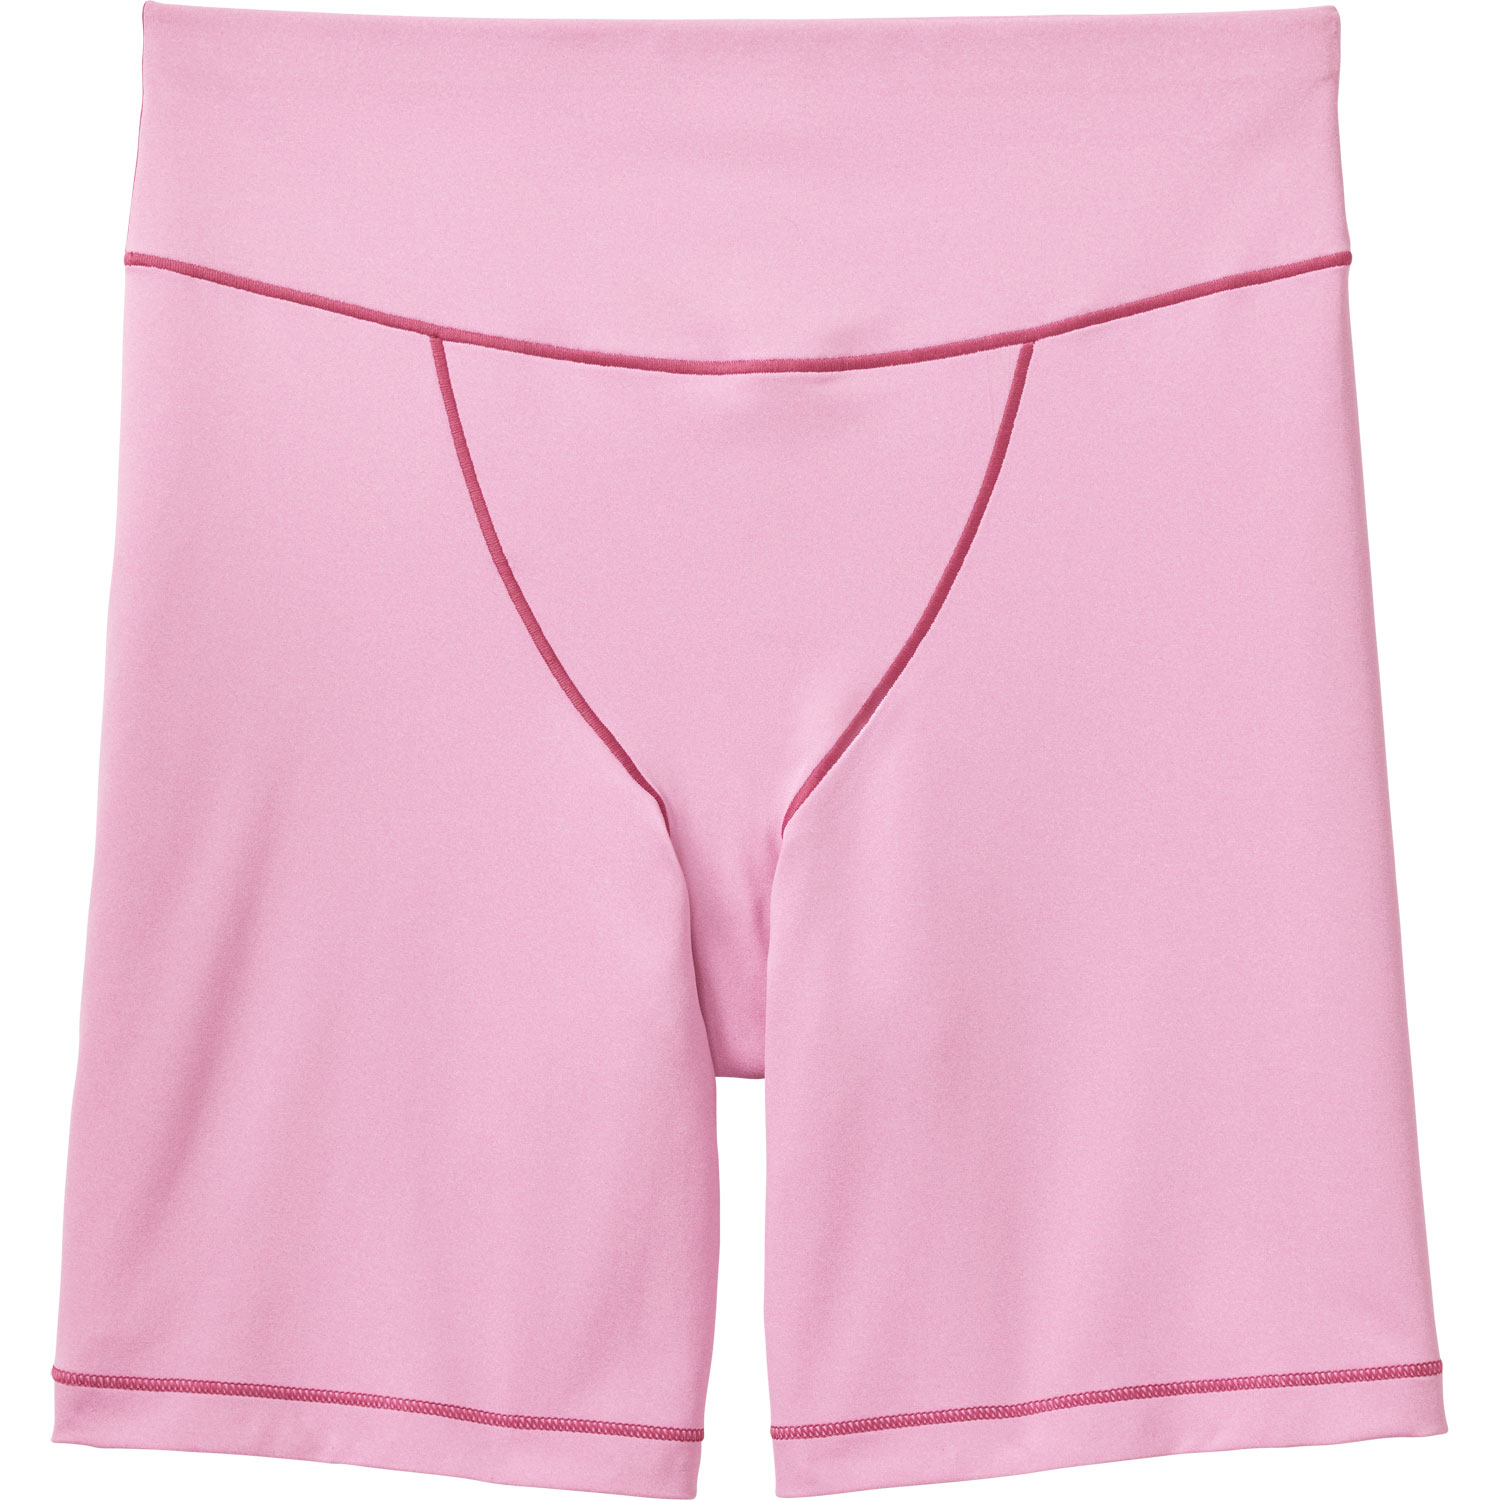 Women's Dry on the Fly Long Boxer Briefs